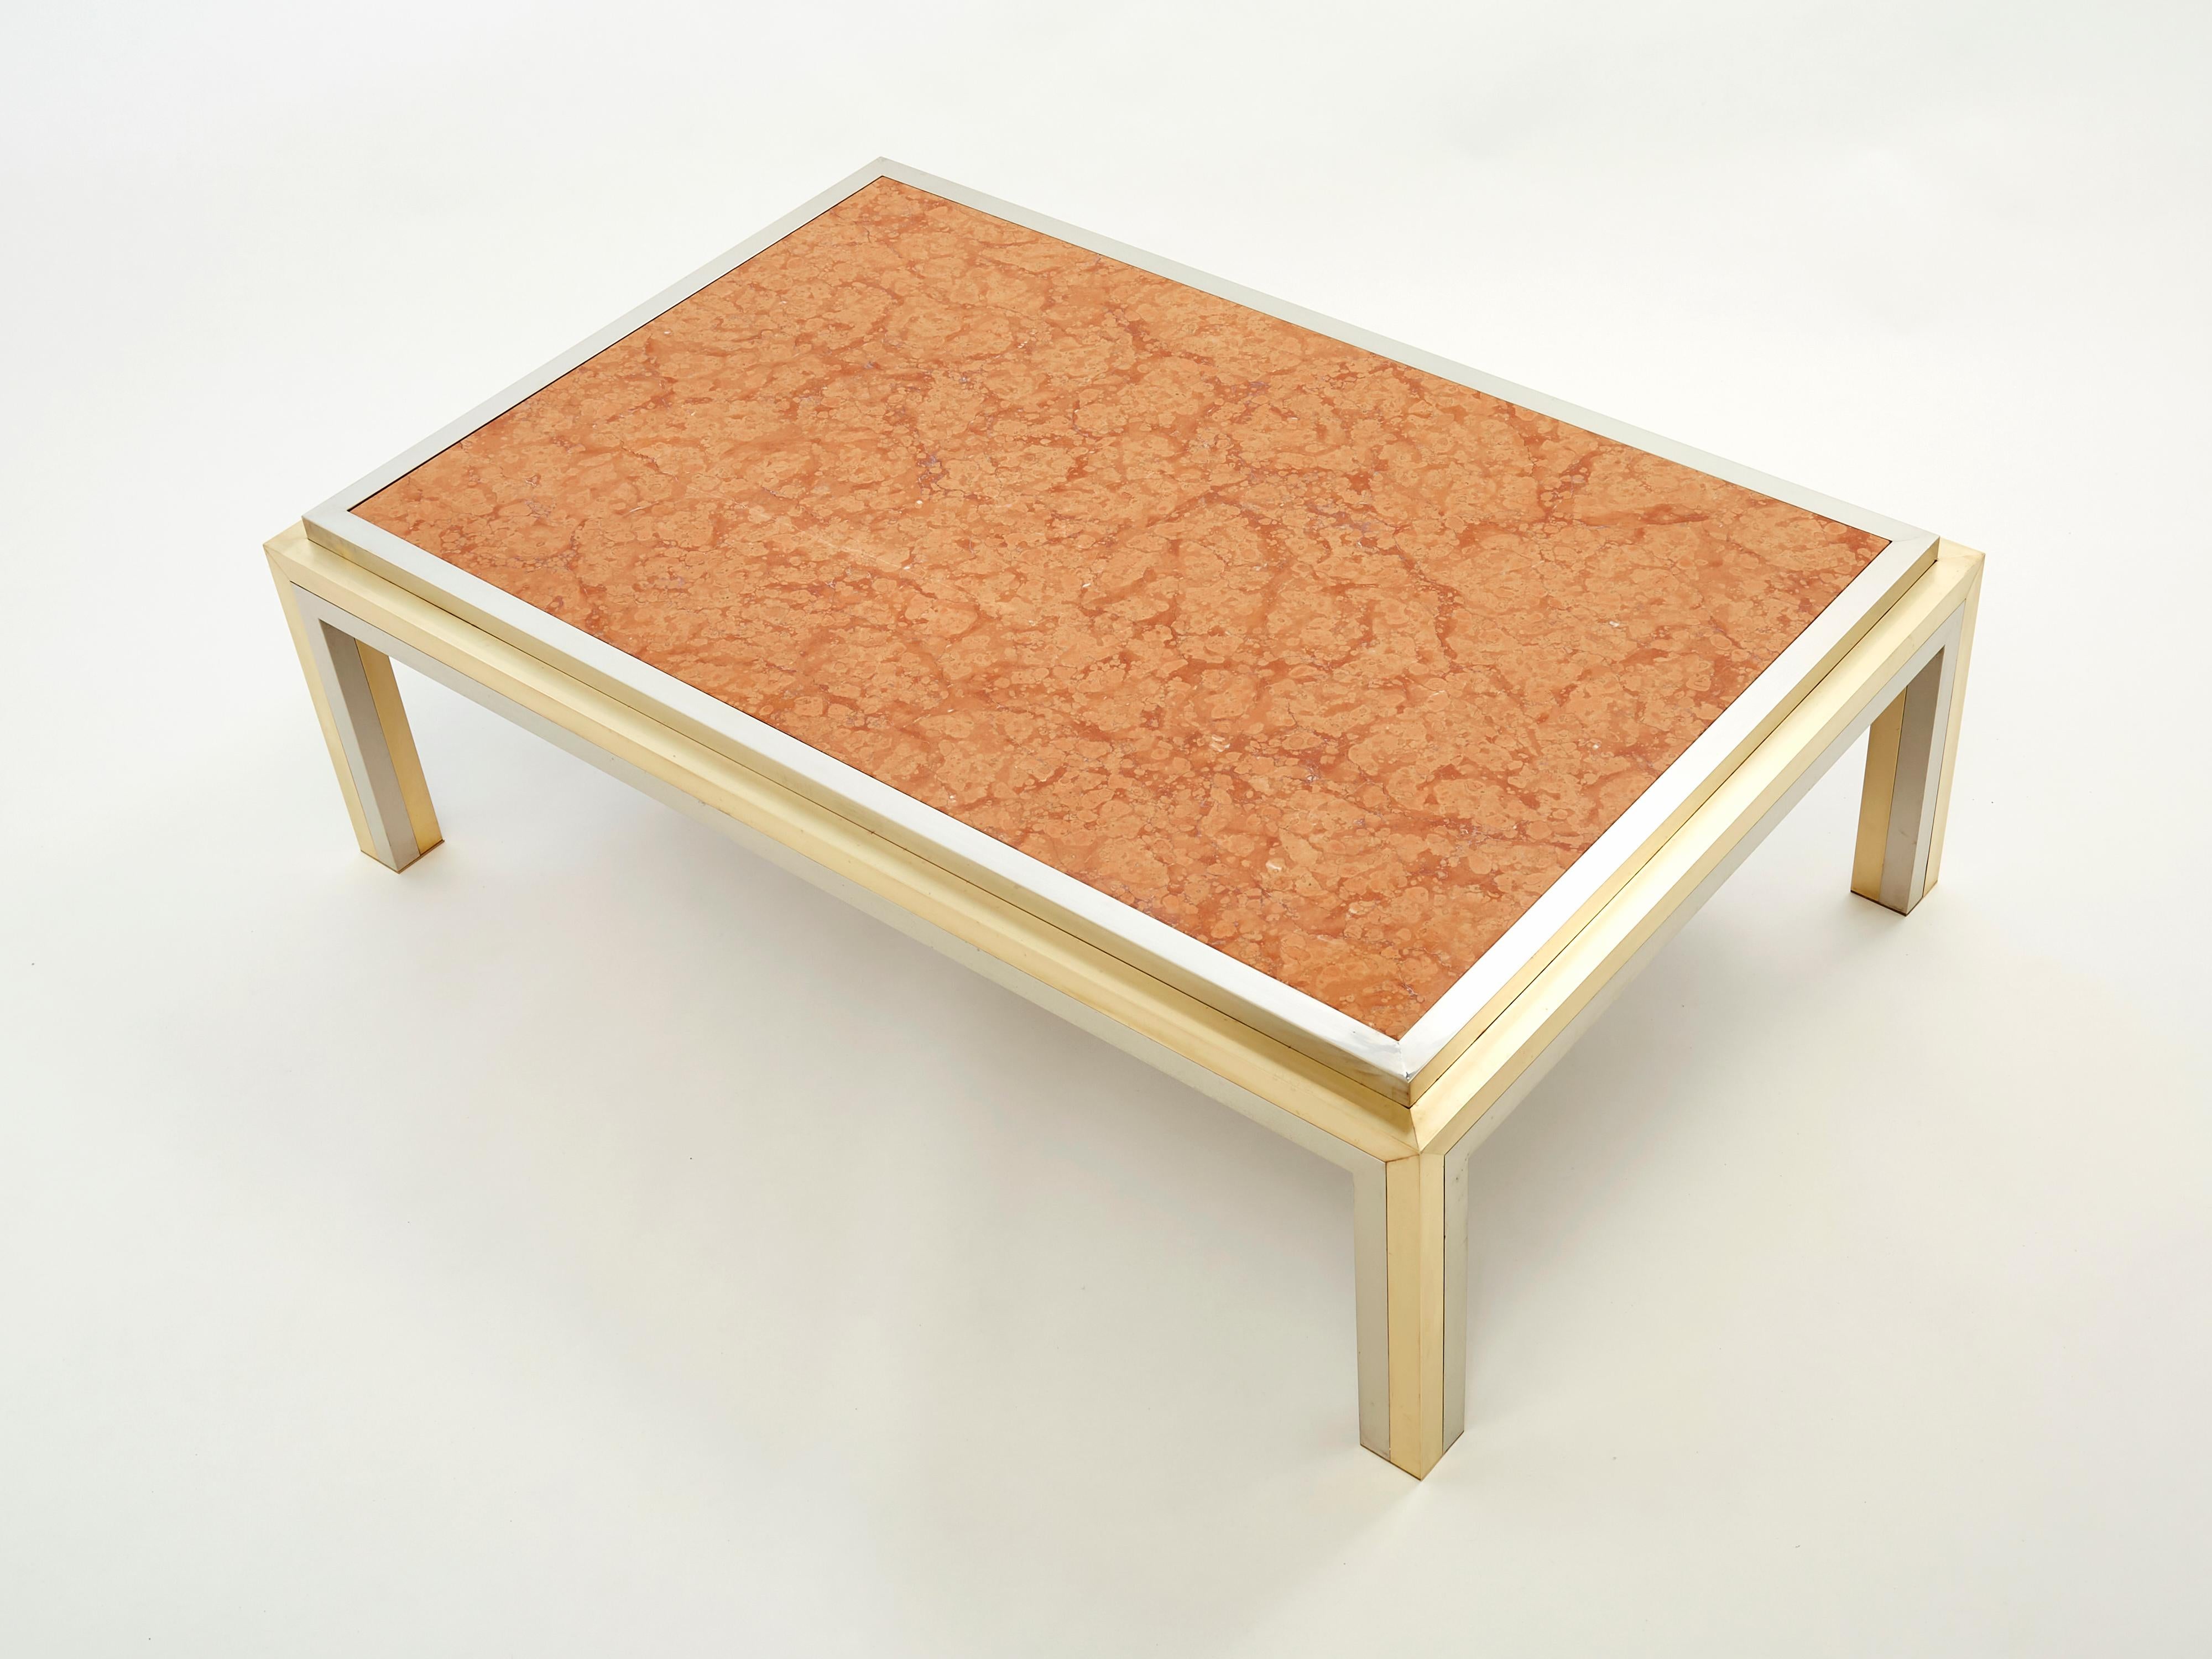 A beautiful piece of design, this coffee table will be the focal point of your living room. Symmetrical brass and chrome elements match perfectly with red Italian marble from Verona, the result being a sleek decorative piece. Made in Italy for